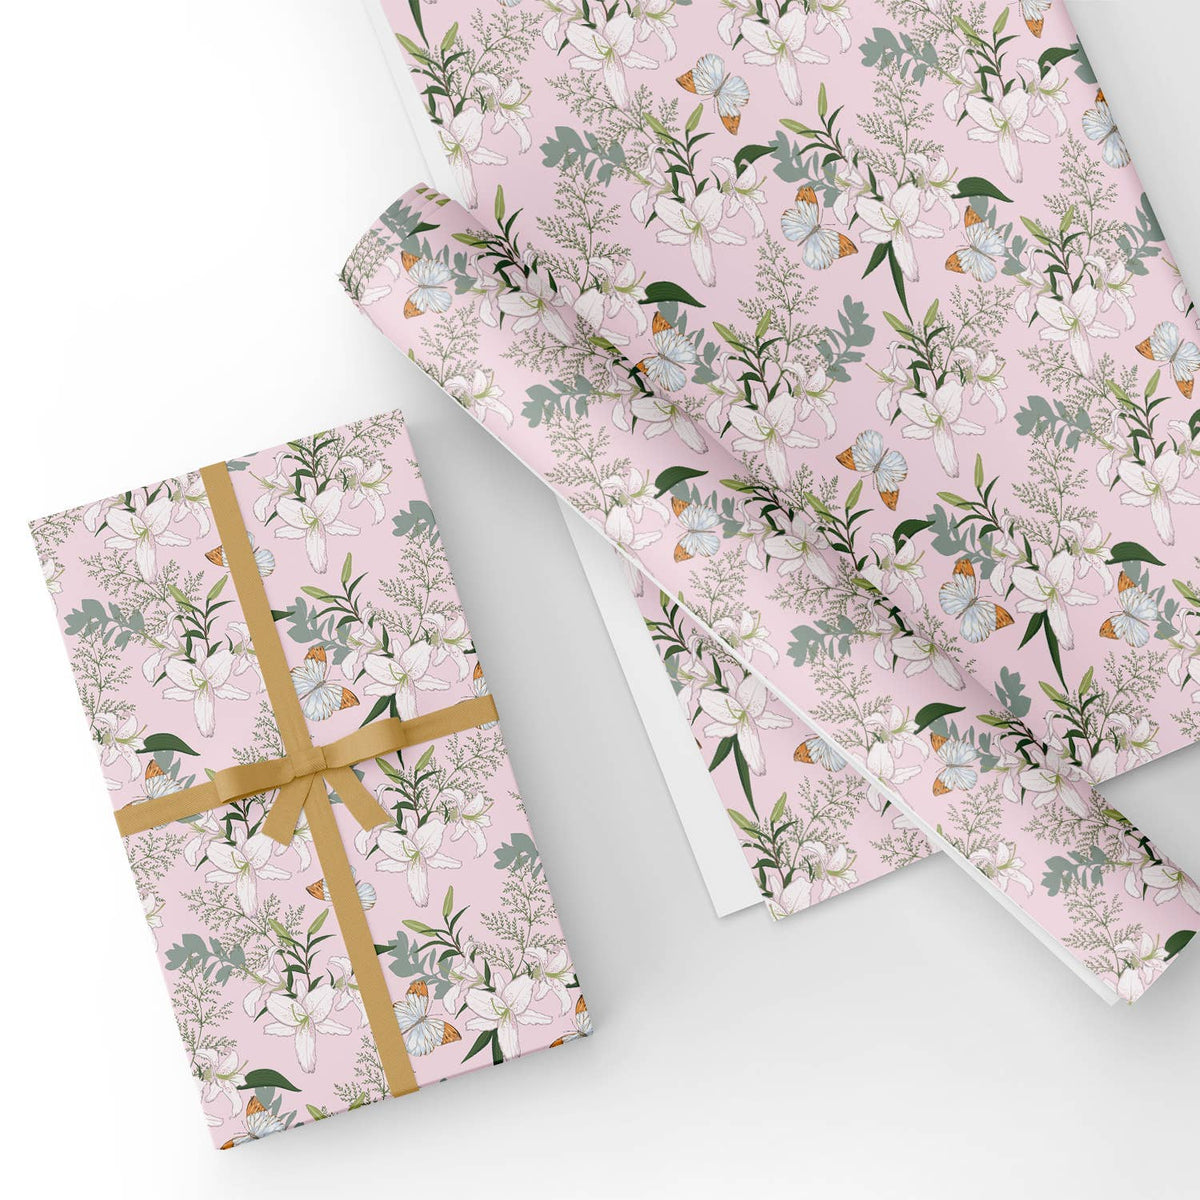 SALE!! Stock Shoppe: Buttercup Floral Gift Wrap Sheets - WH